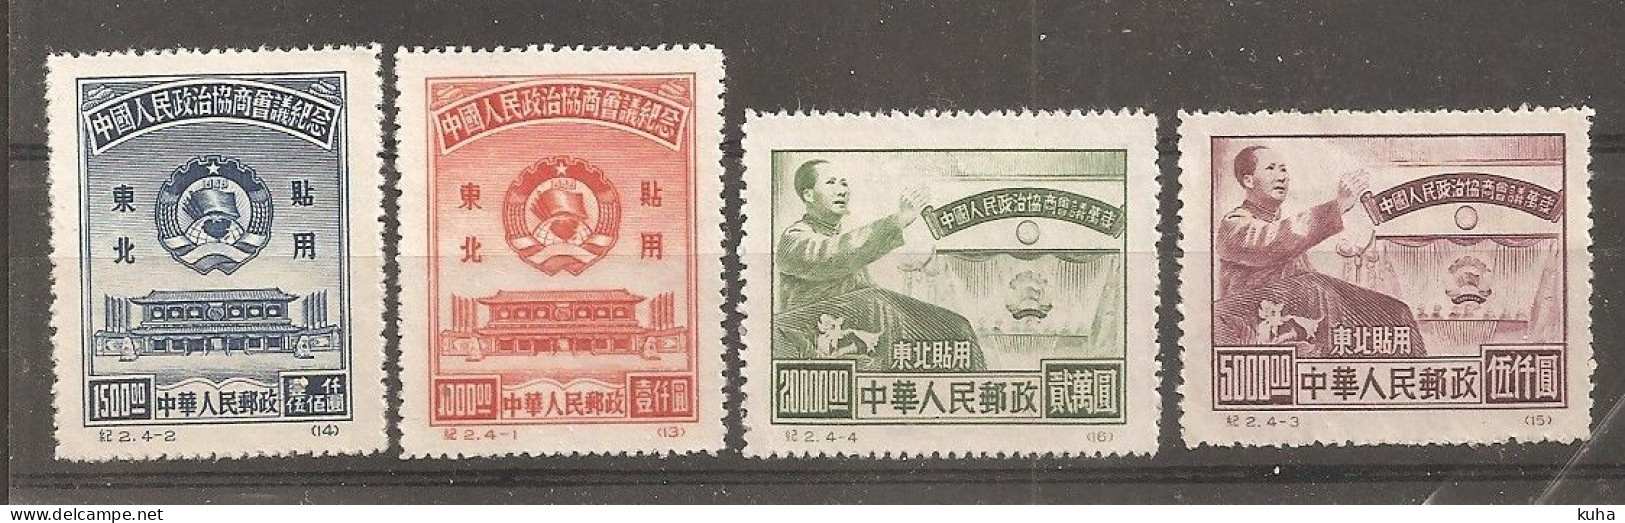 China Chine  MNH 1950 Nord-East - China Del Nordeste 1946-48